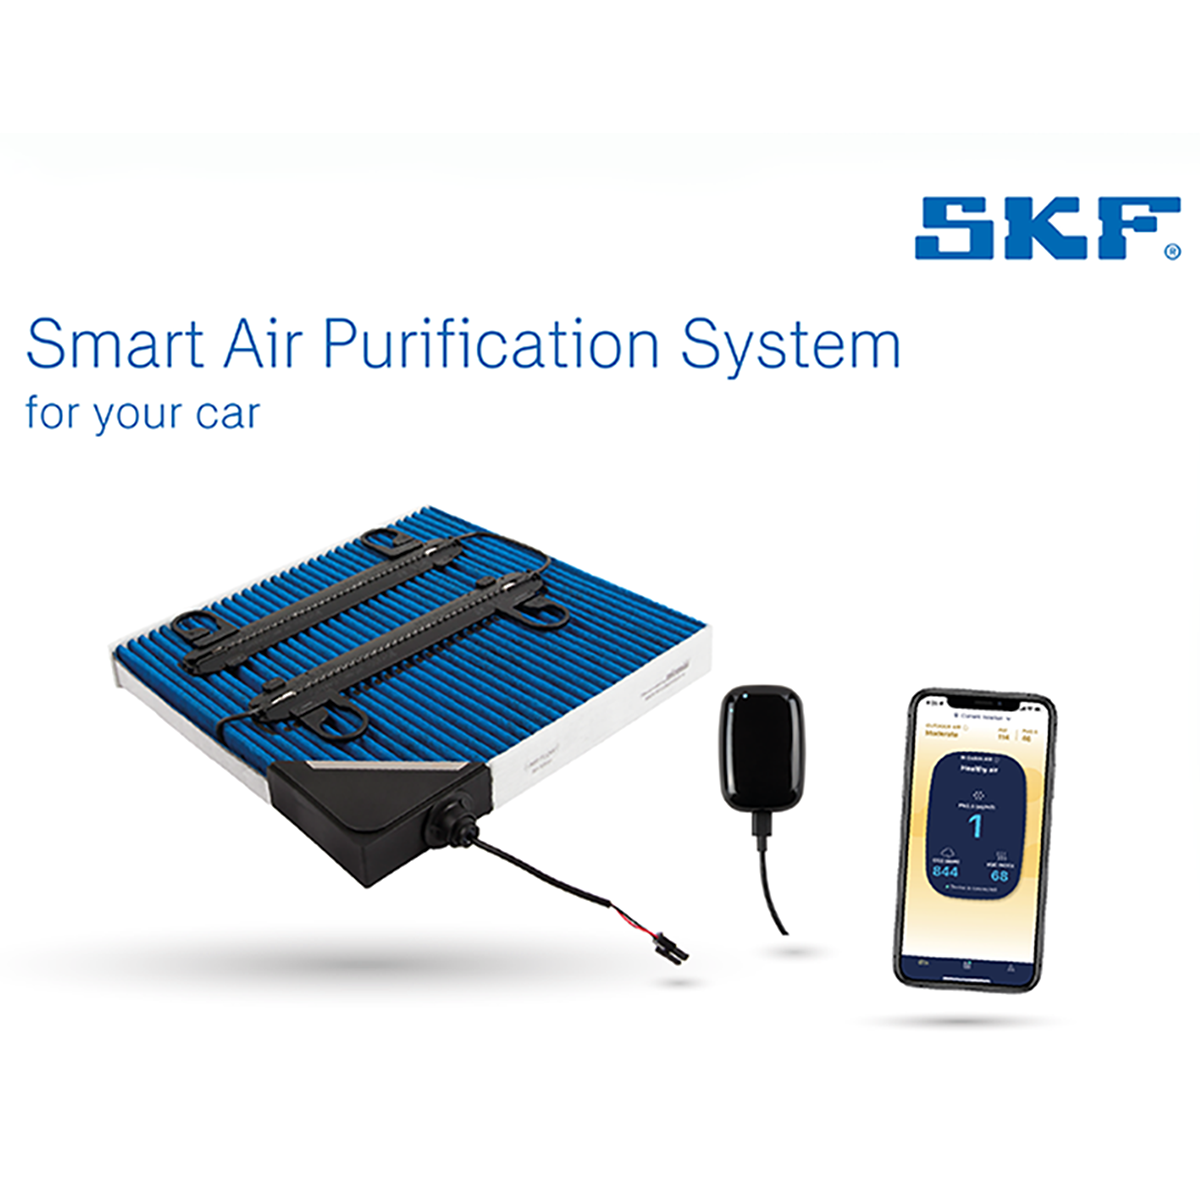 SKF brings advanced in-cabin air purification to automotive aftermarket